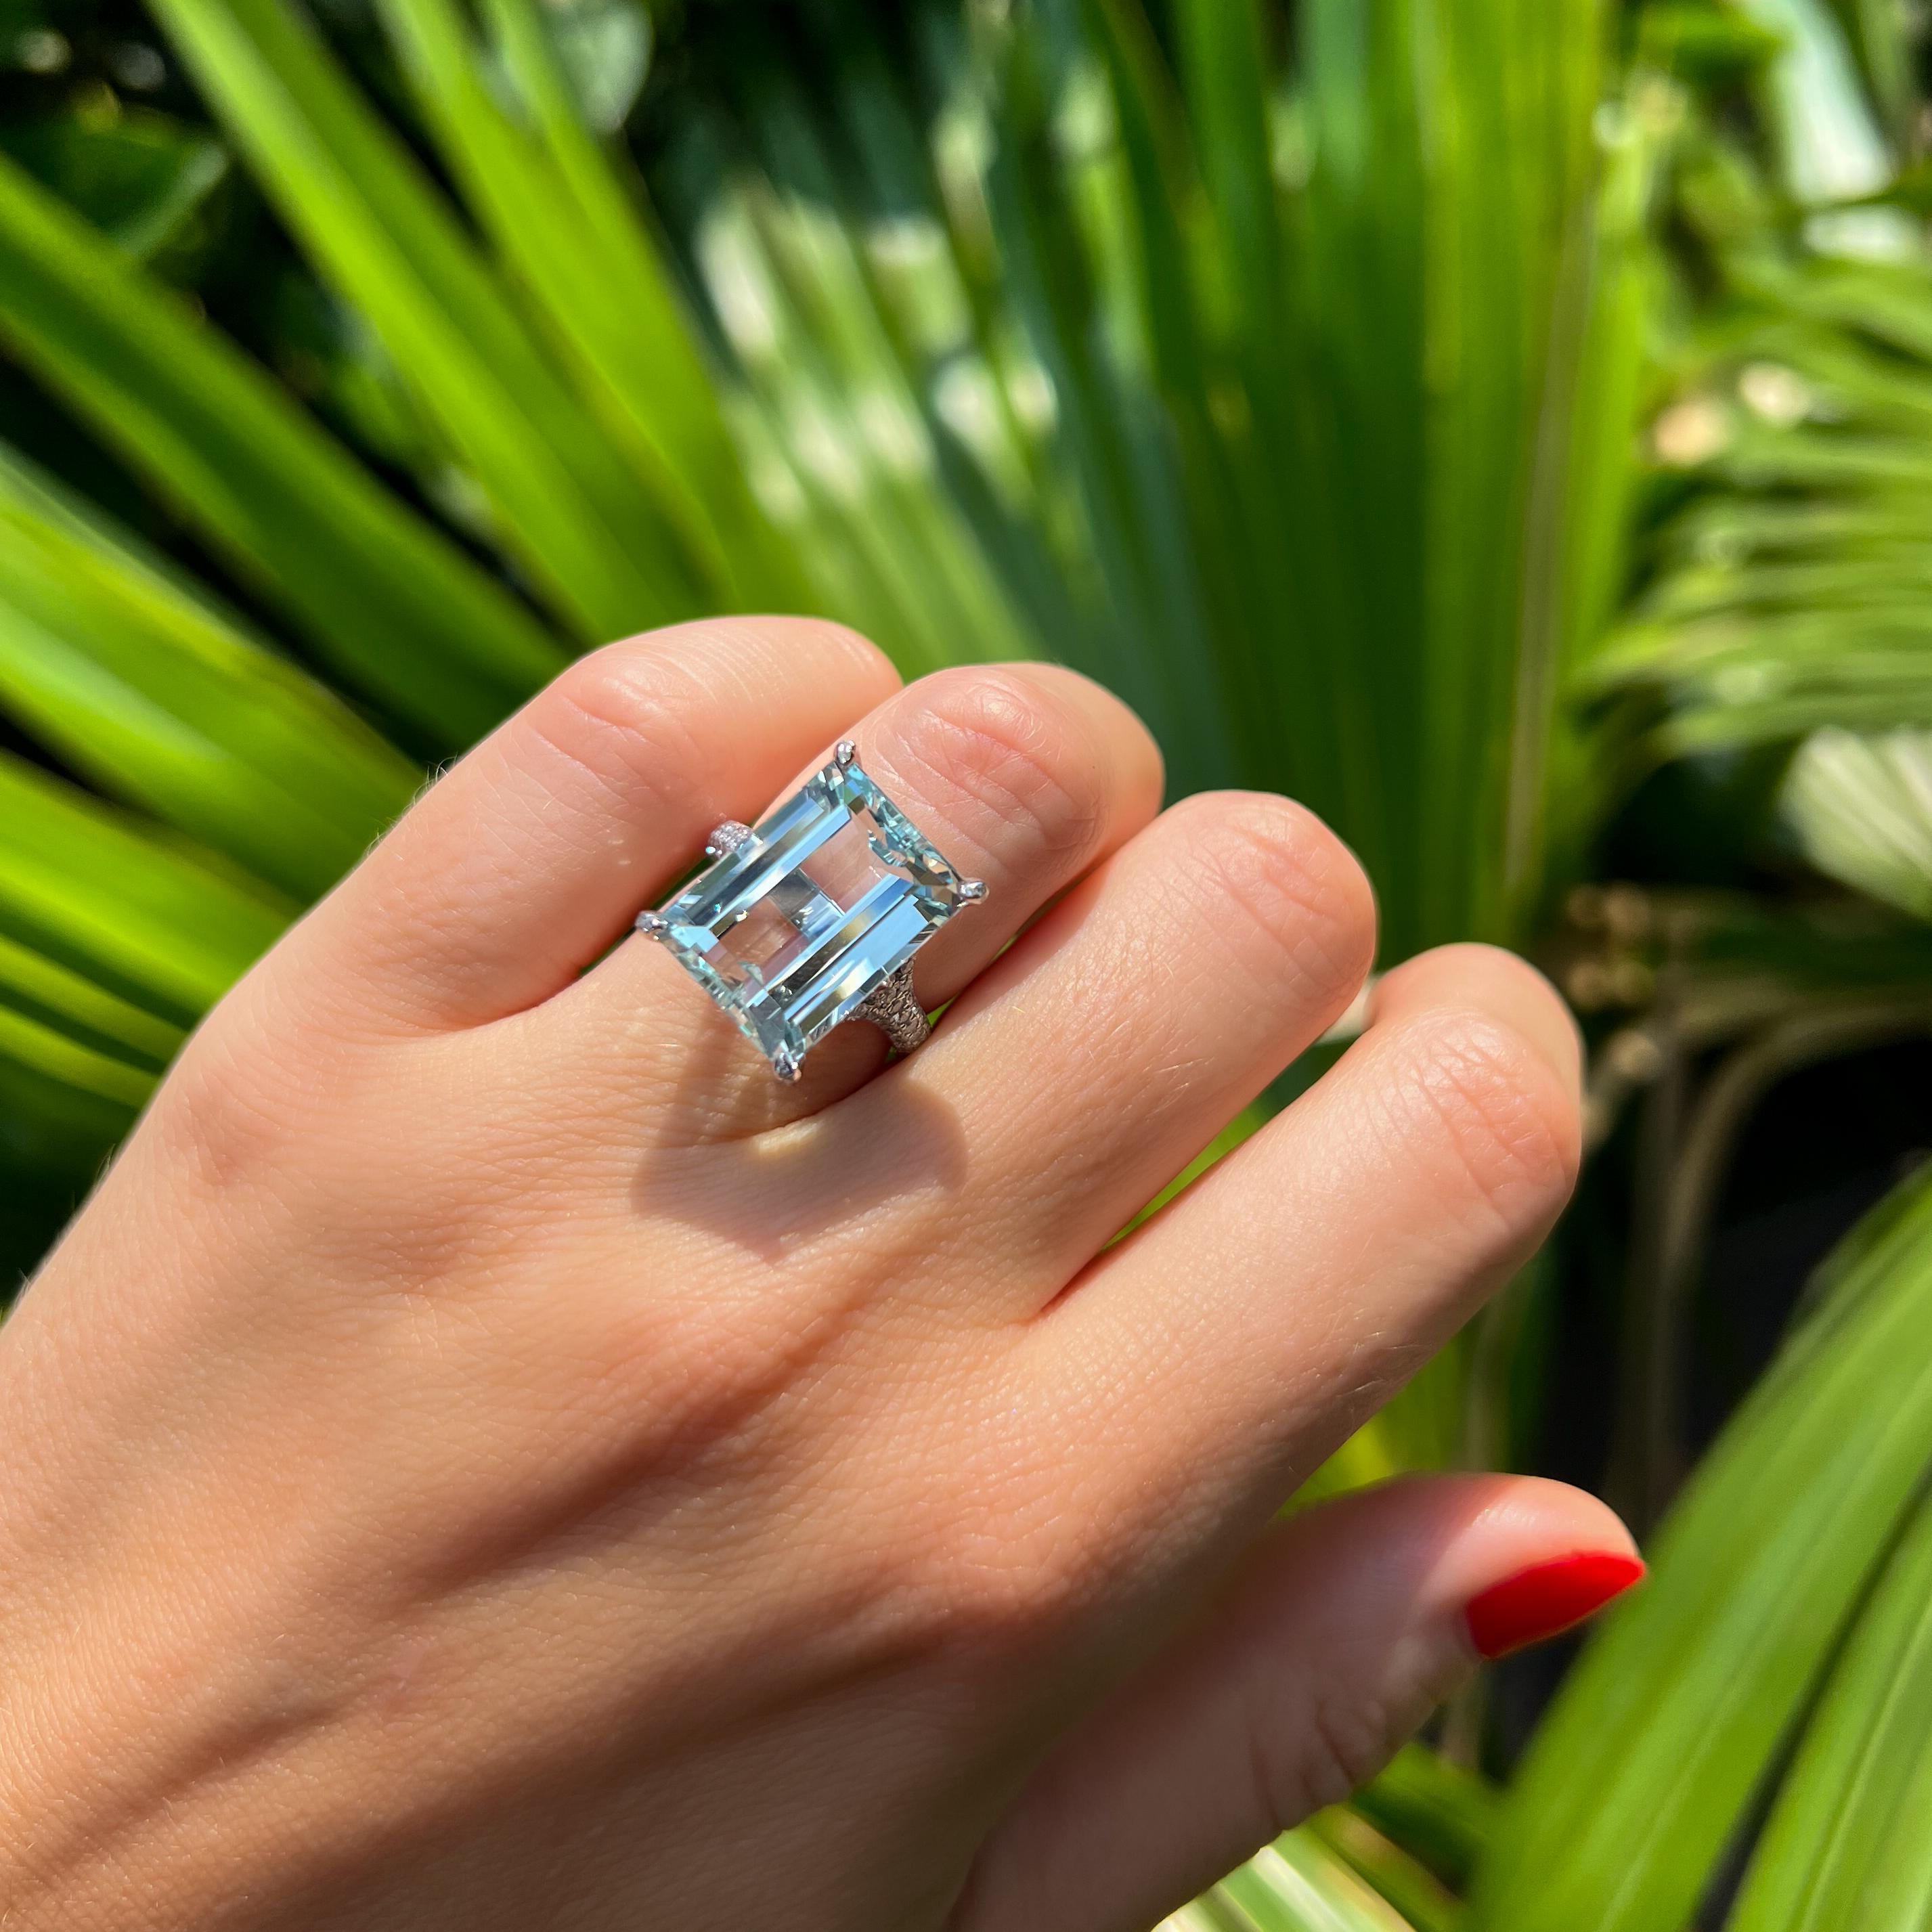 Stunning, clear and perfectly cut pale blue 11.23ct Aquamarine, set in a Diamond micropave ring. The clean emerald-cut facets reflect the light perfectly whether you are inside or outside. 

The 6 claws are fully encrusted in dazzling diamonds,